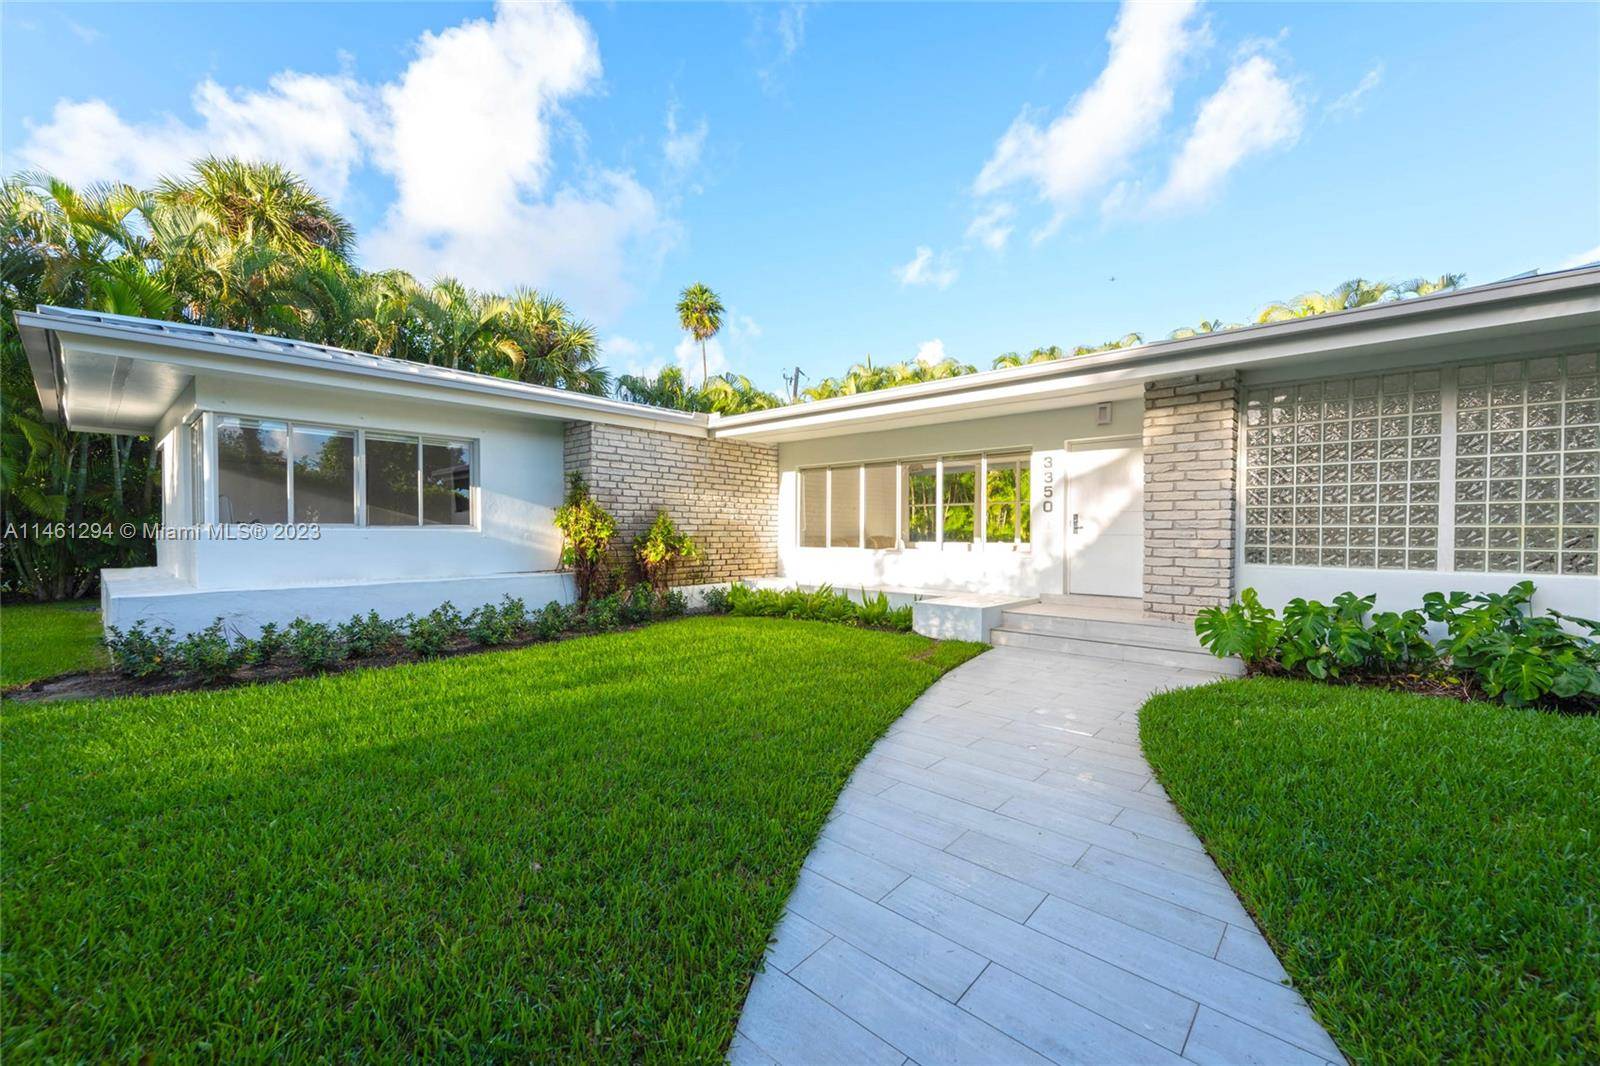 Bright, beautiful and renovated mid century modern home centrally located in a quiet residential street, with walking bridges 2 blocks from the ocean.